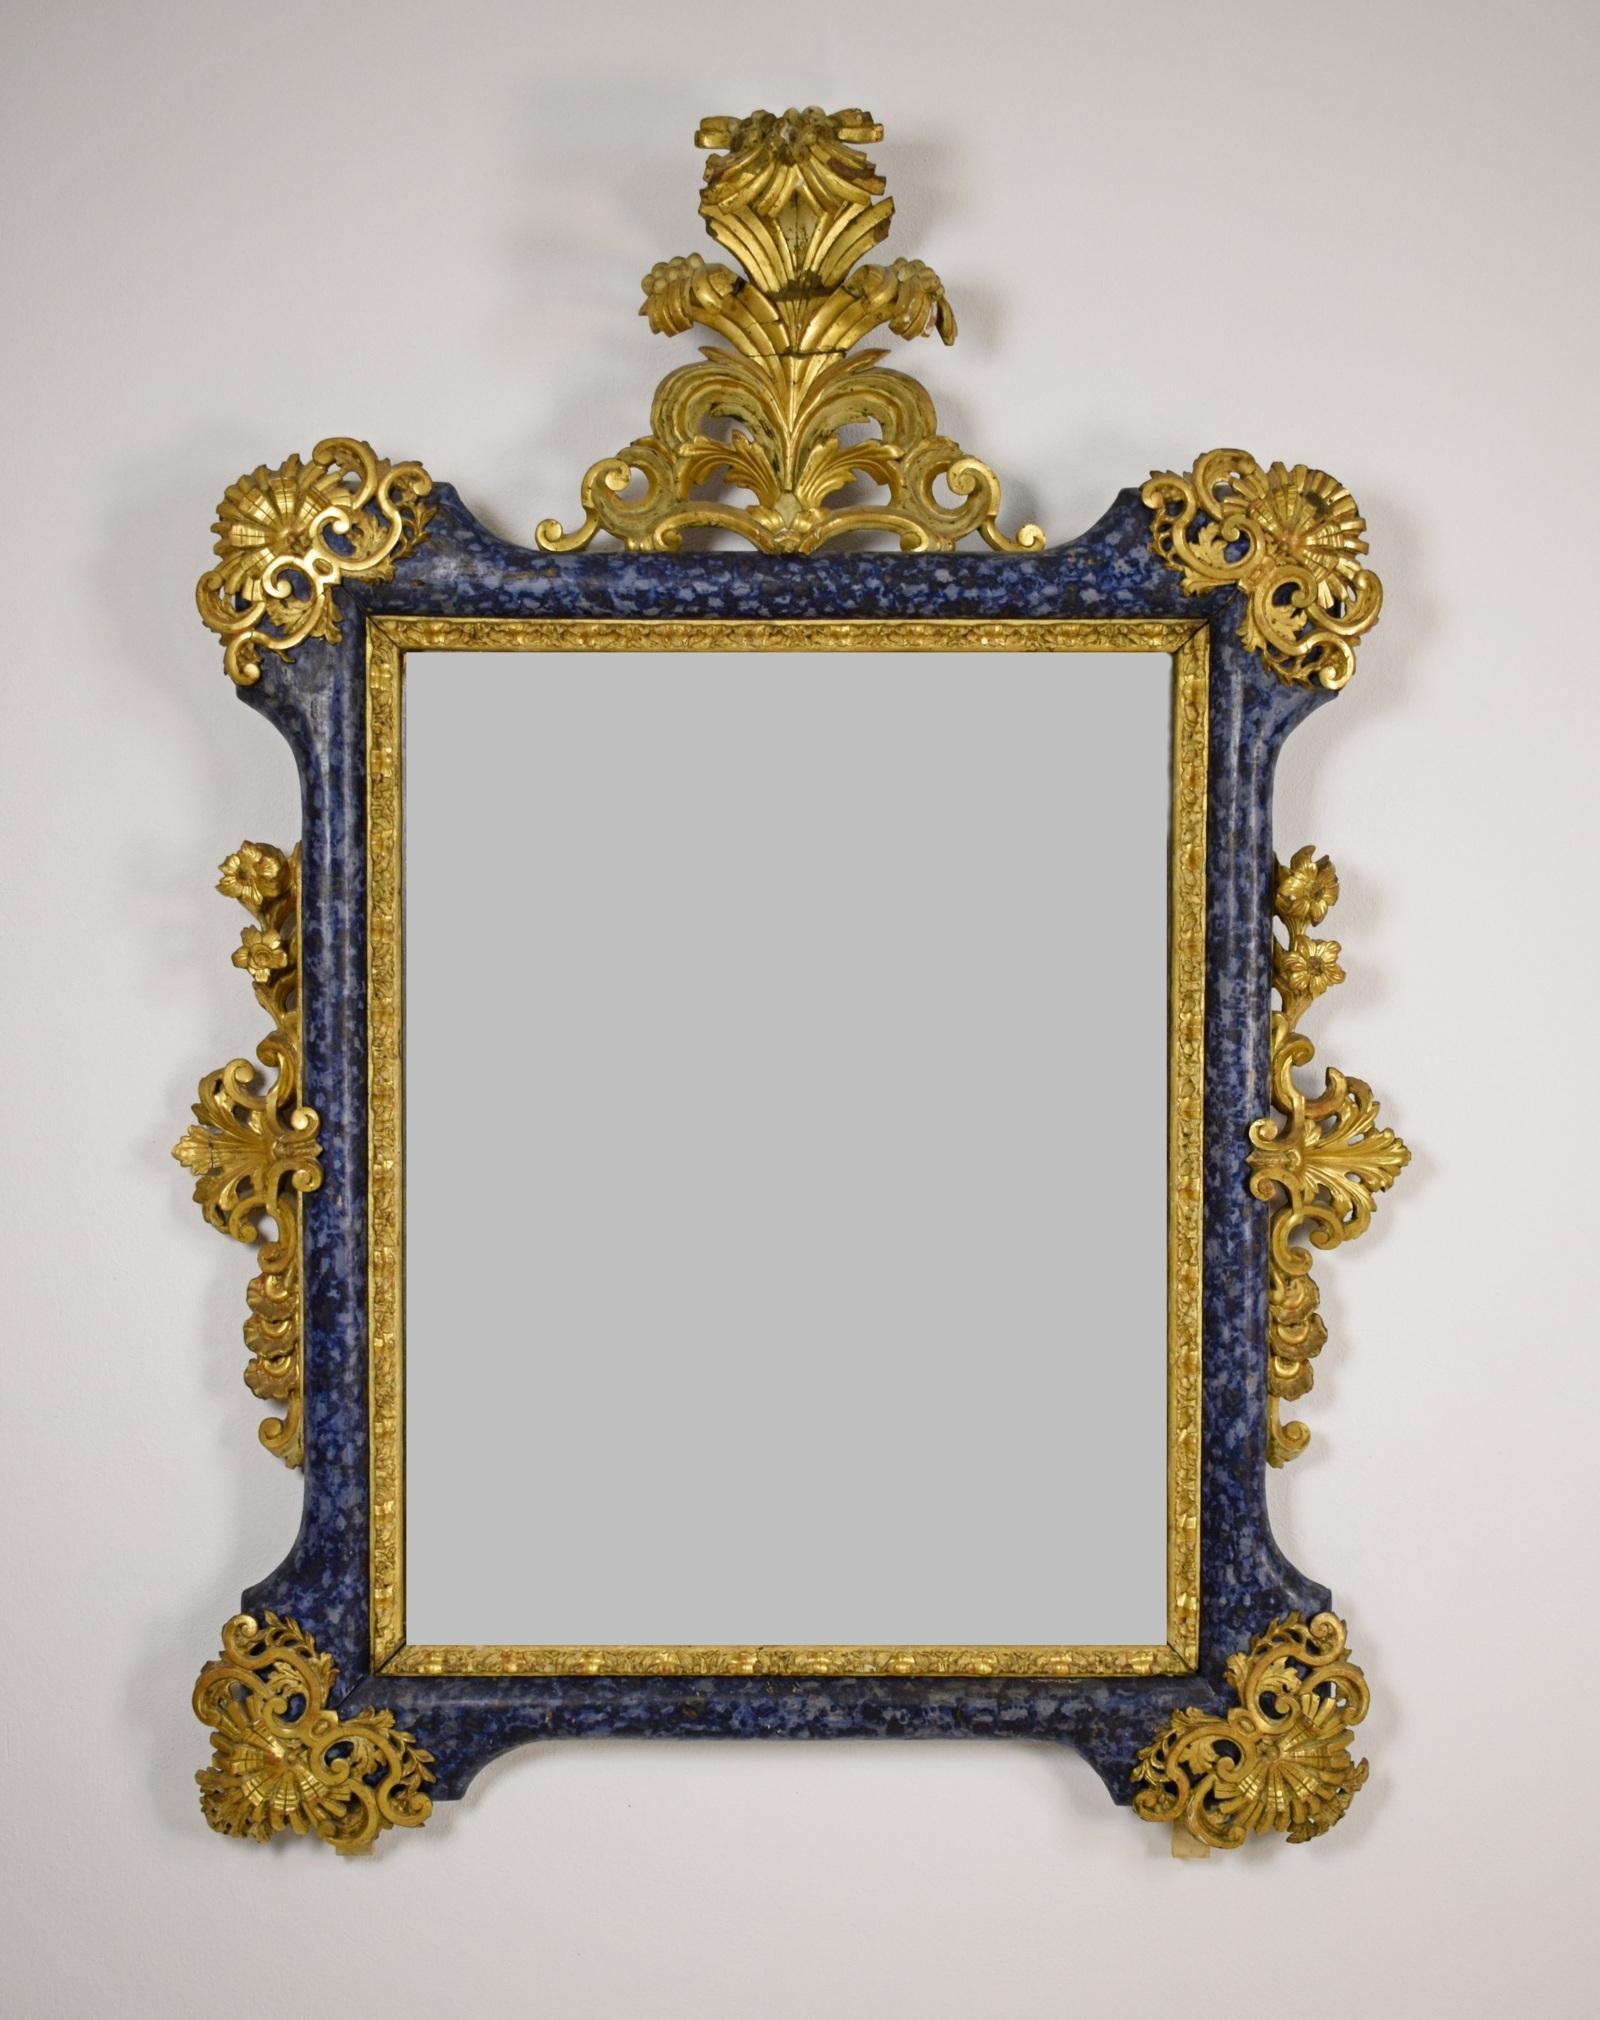 18th Century, Italian Venetian Baroque Lacquered giltwood Mirror 

This wonderful Baroque mirror was made in Venice (Italy), around the middle of the 18th century, in lacquered, carved and gilded wood.
It consists of a rectangular frame in gilded